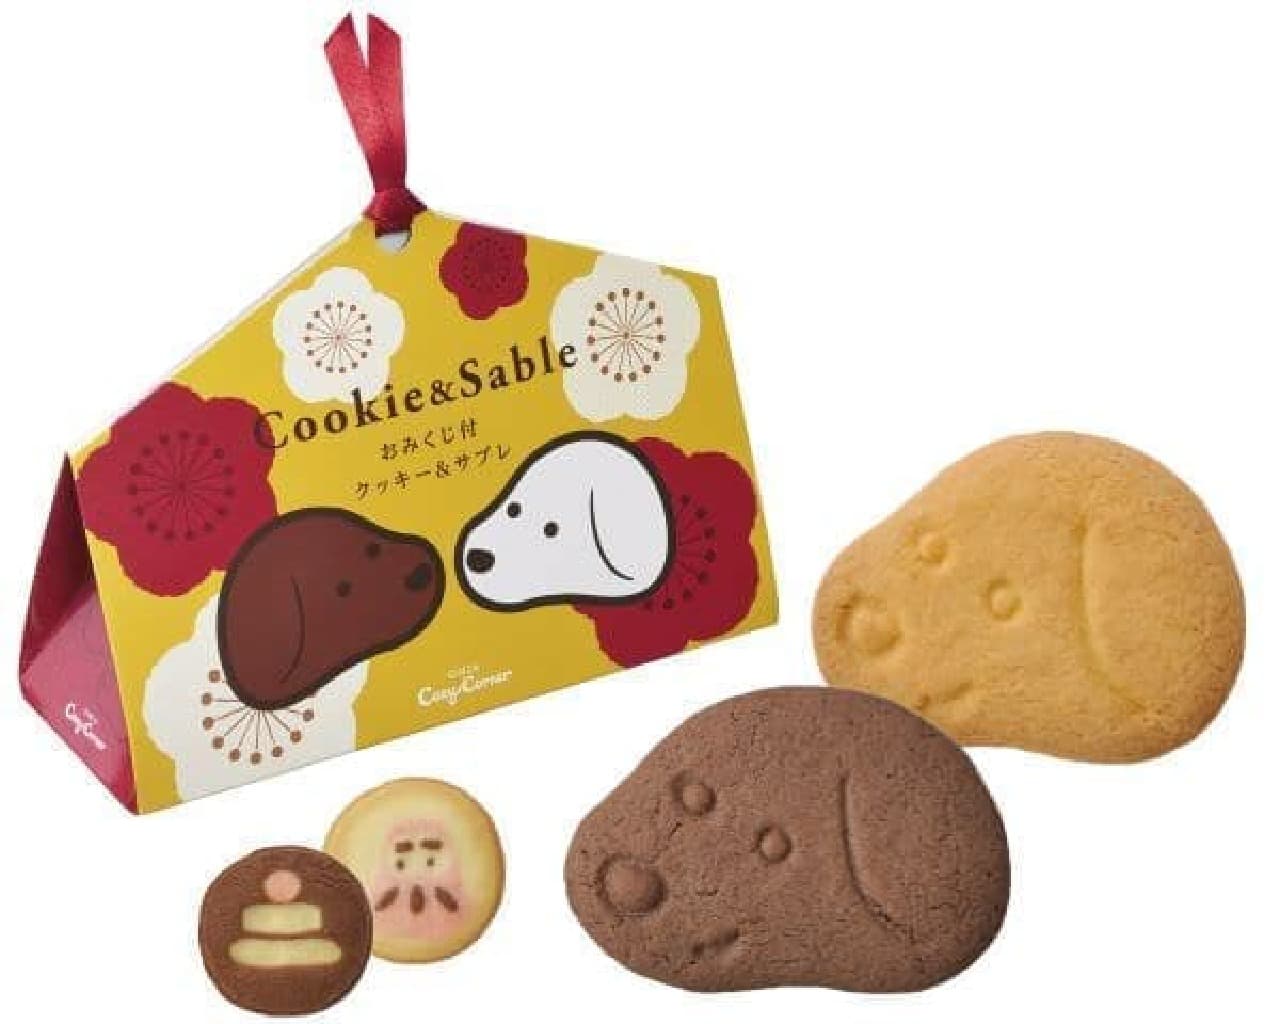 Assortment of cute cookies with daruma doll and kagami mochi pattern and sable dog sable